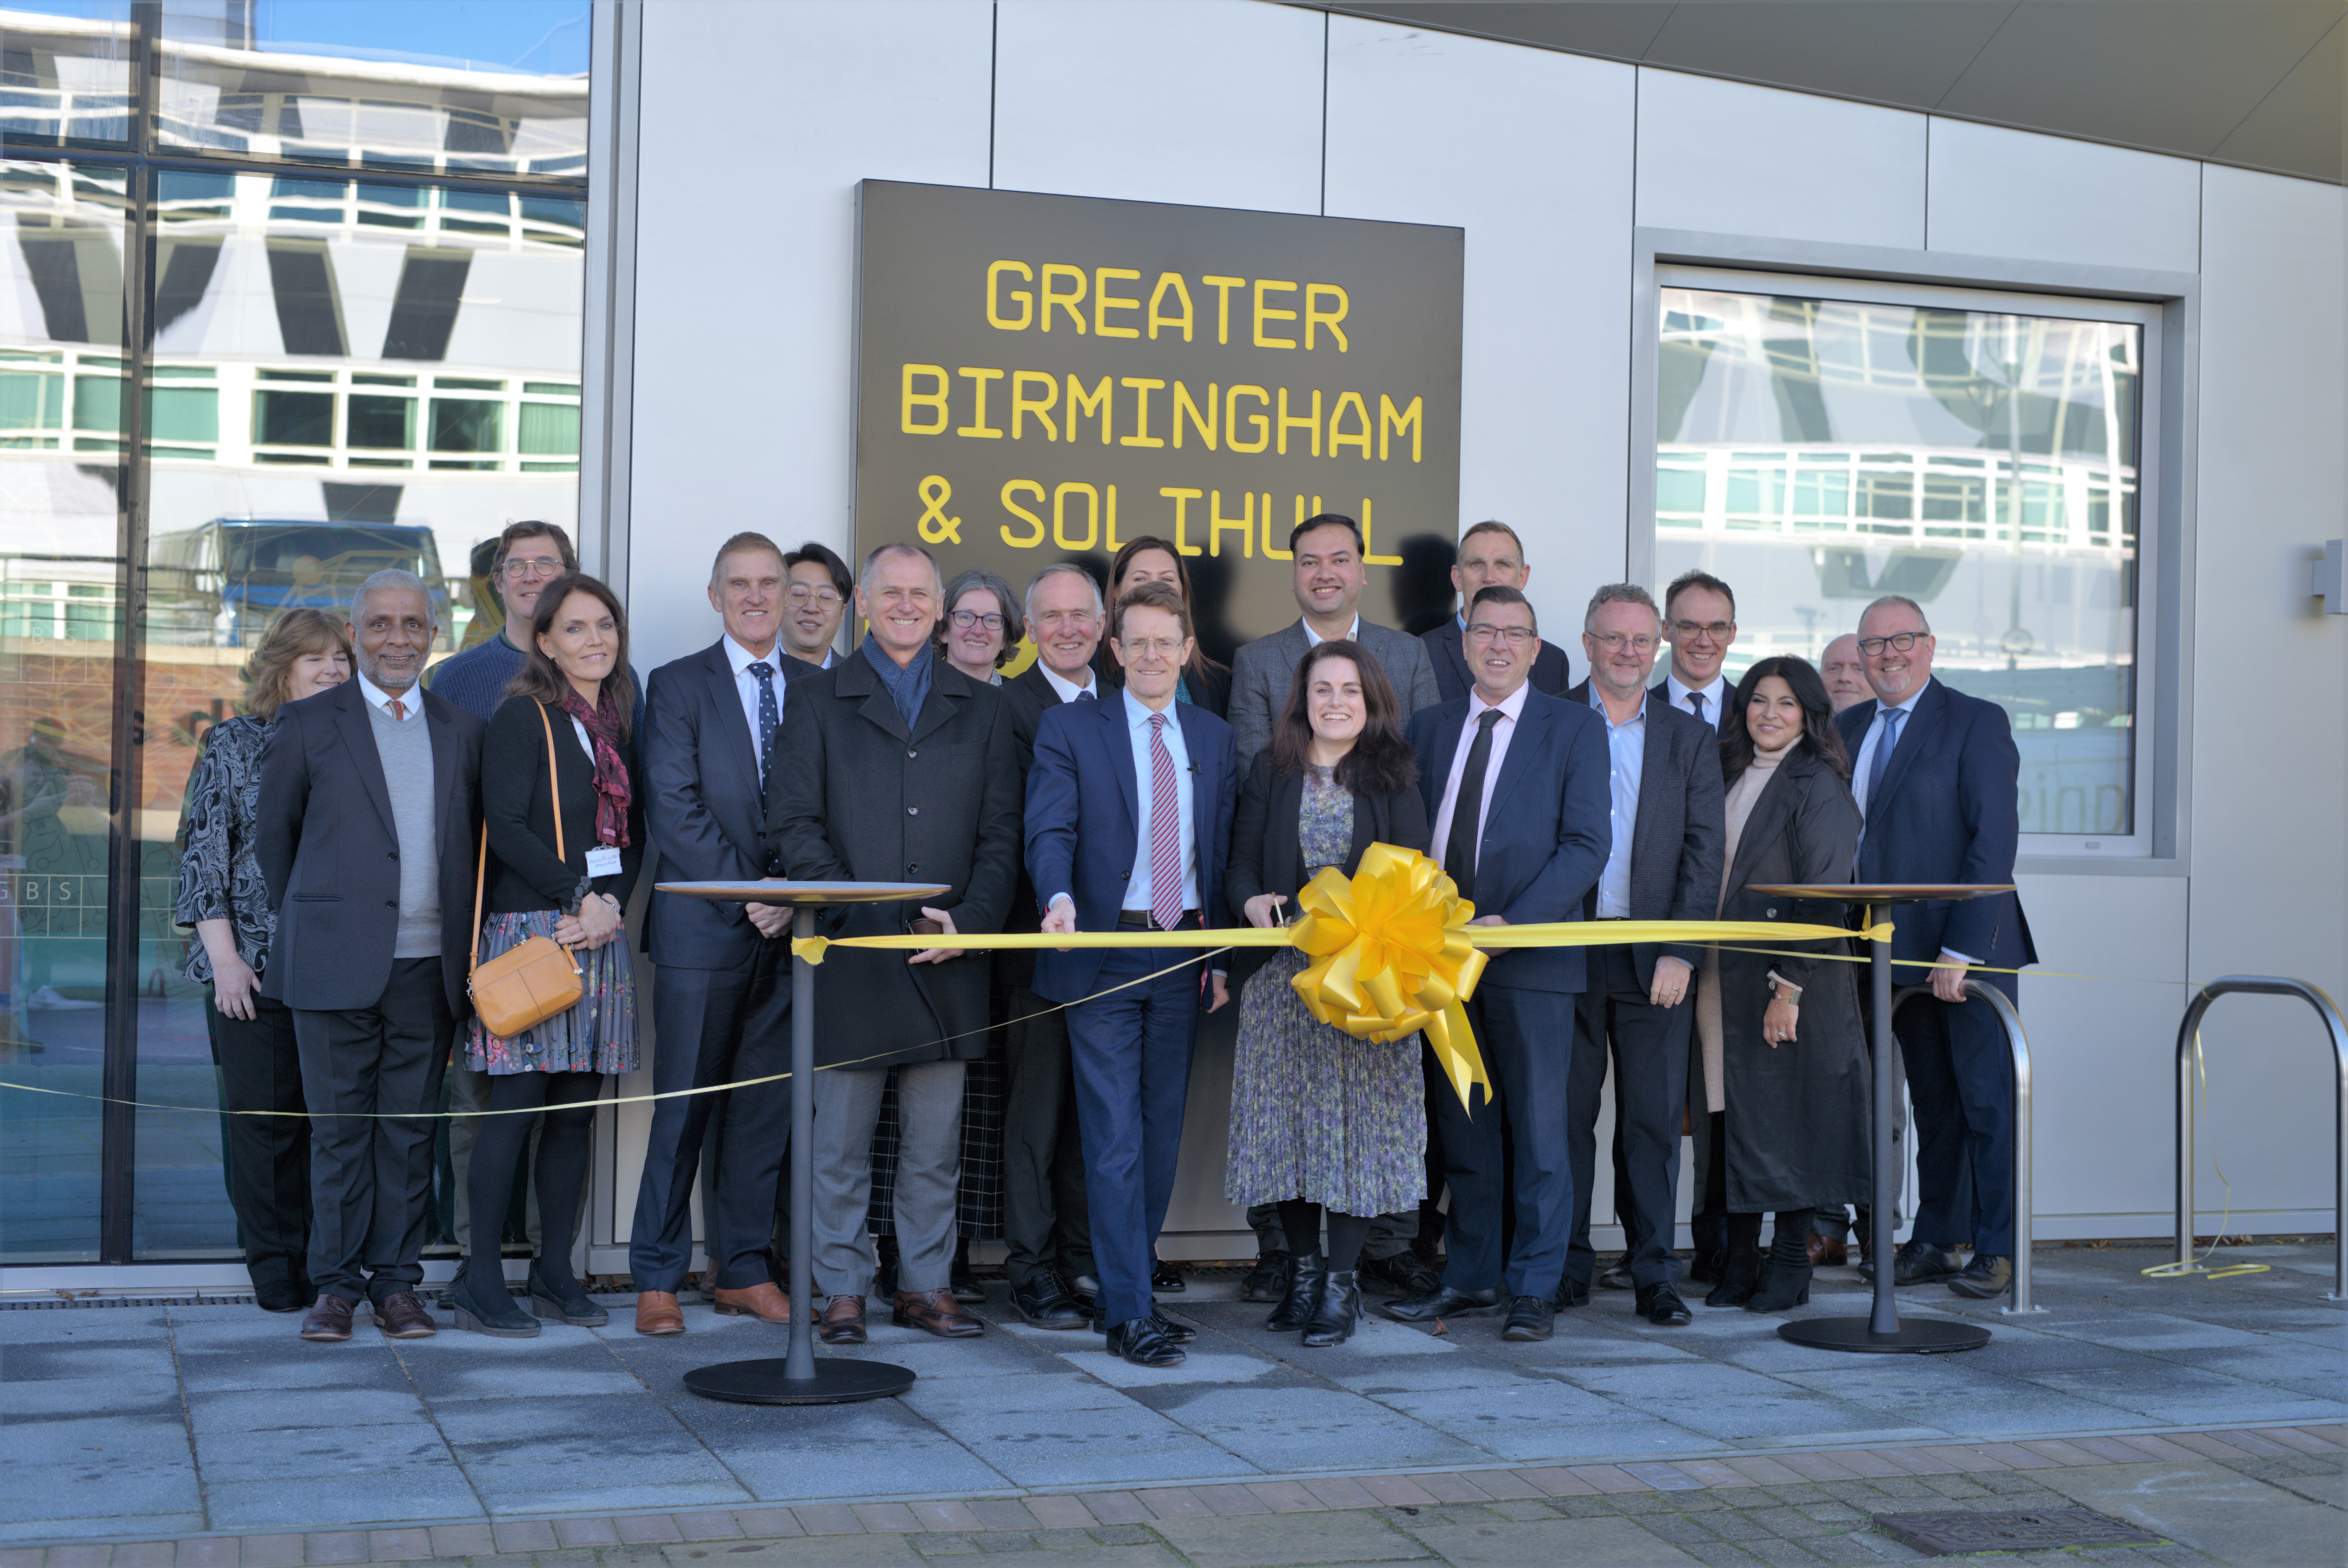 Mayor Andy Street and others cut a yellow ribbon in front of the new building